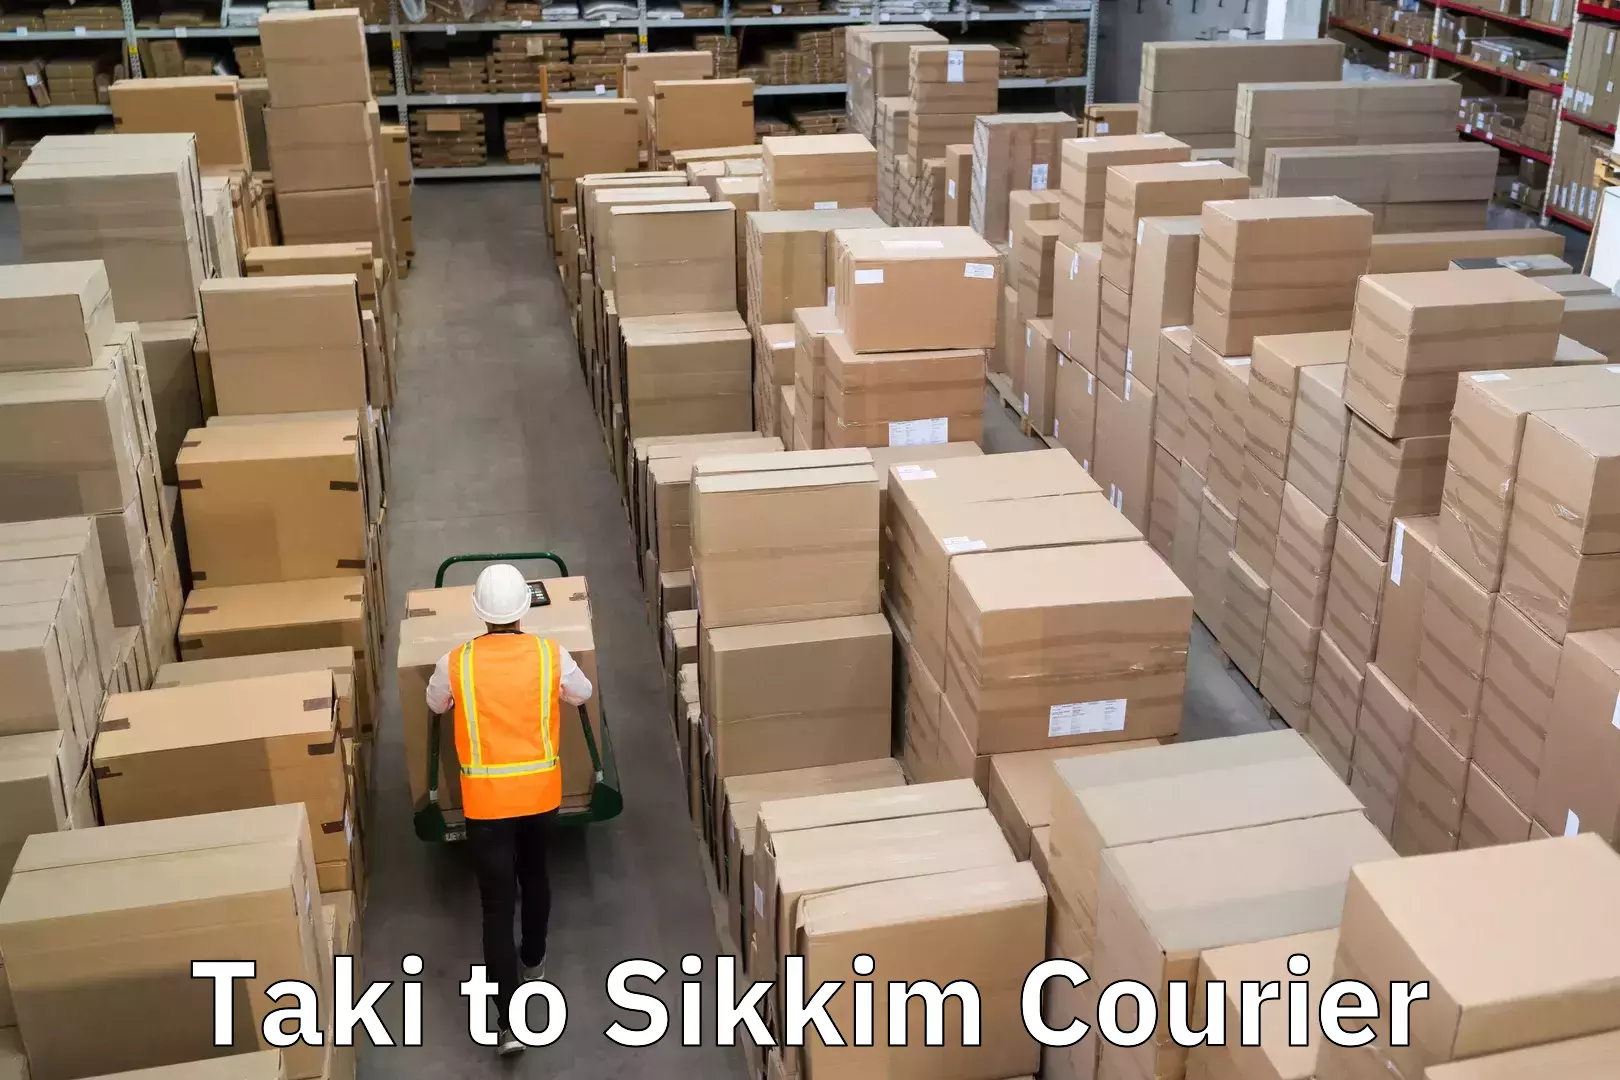 Same-day delivery solutions Taki to Sikkim